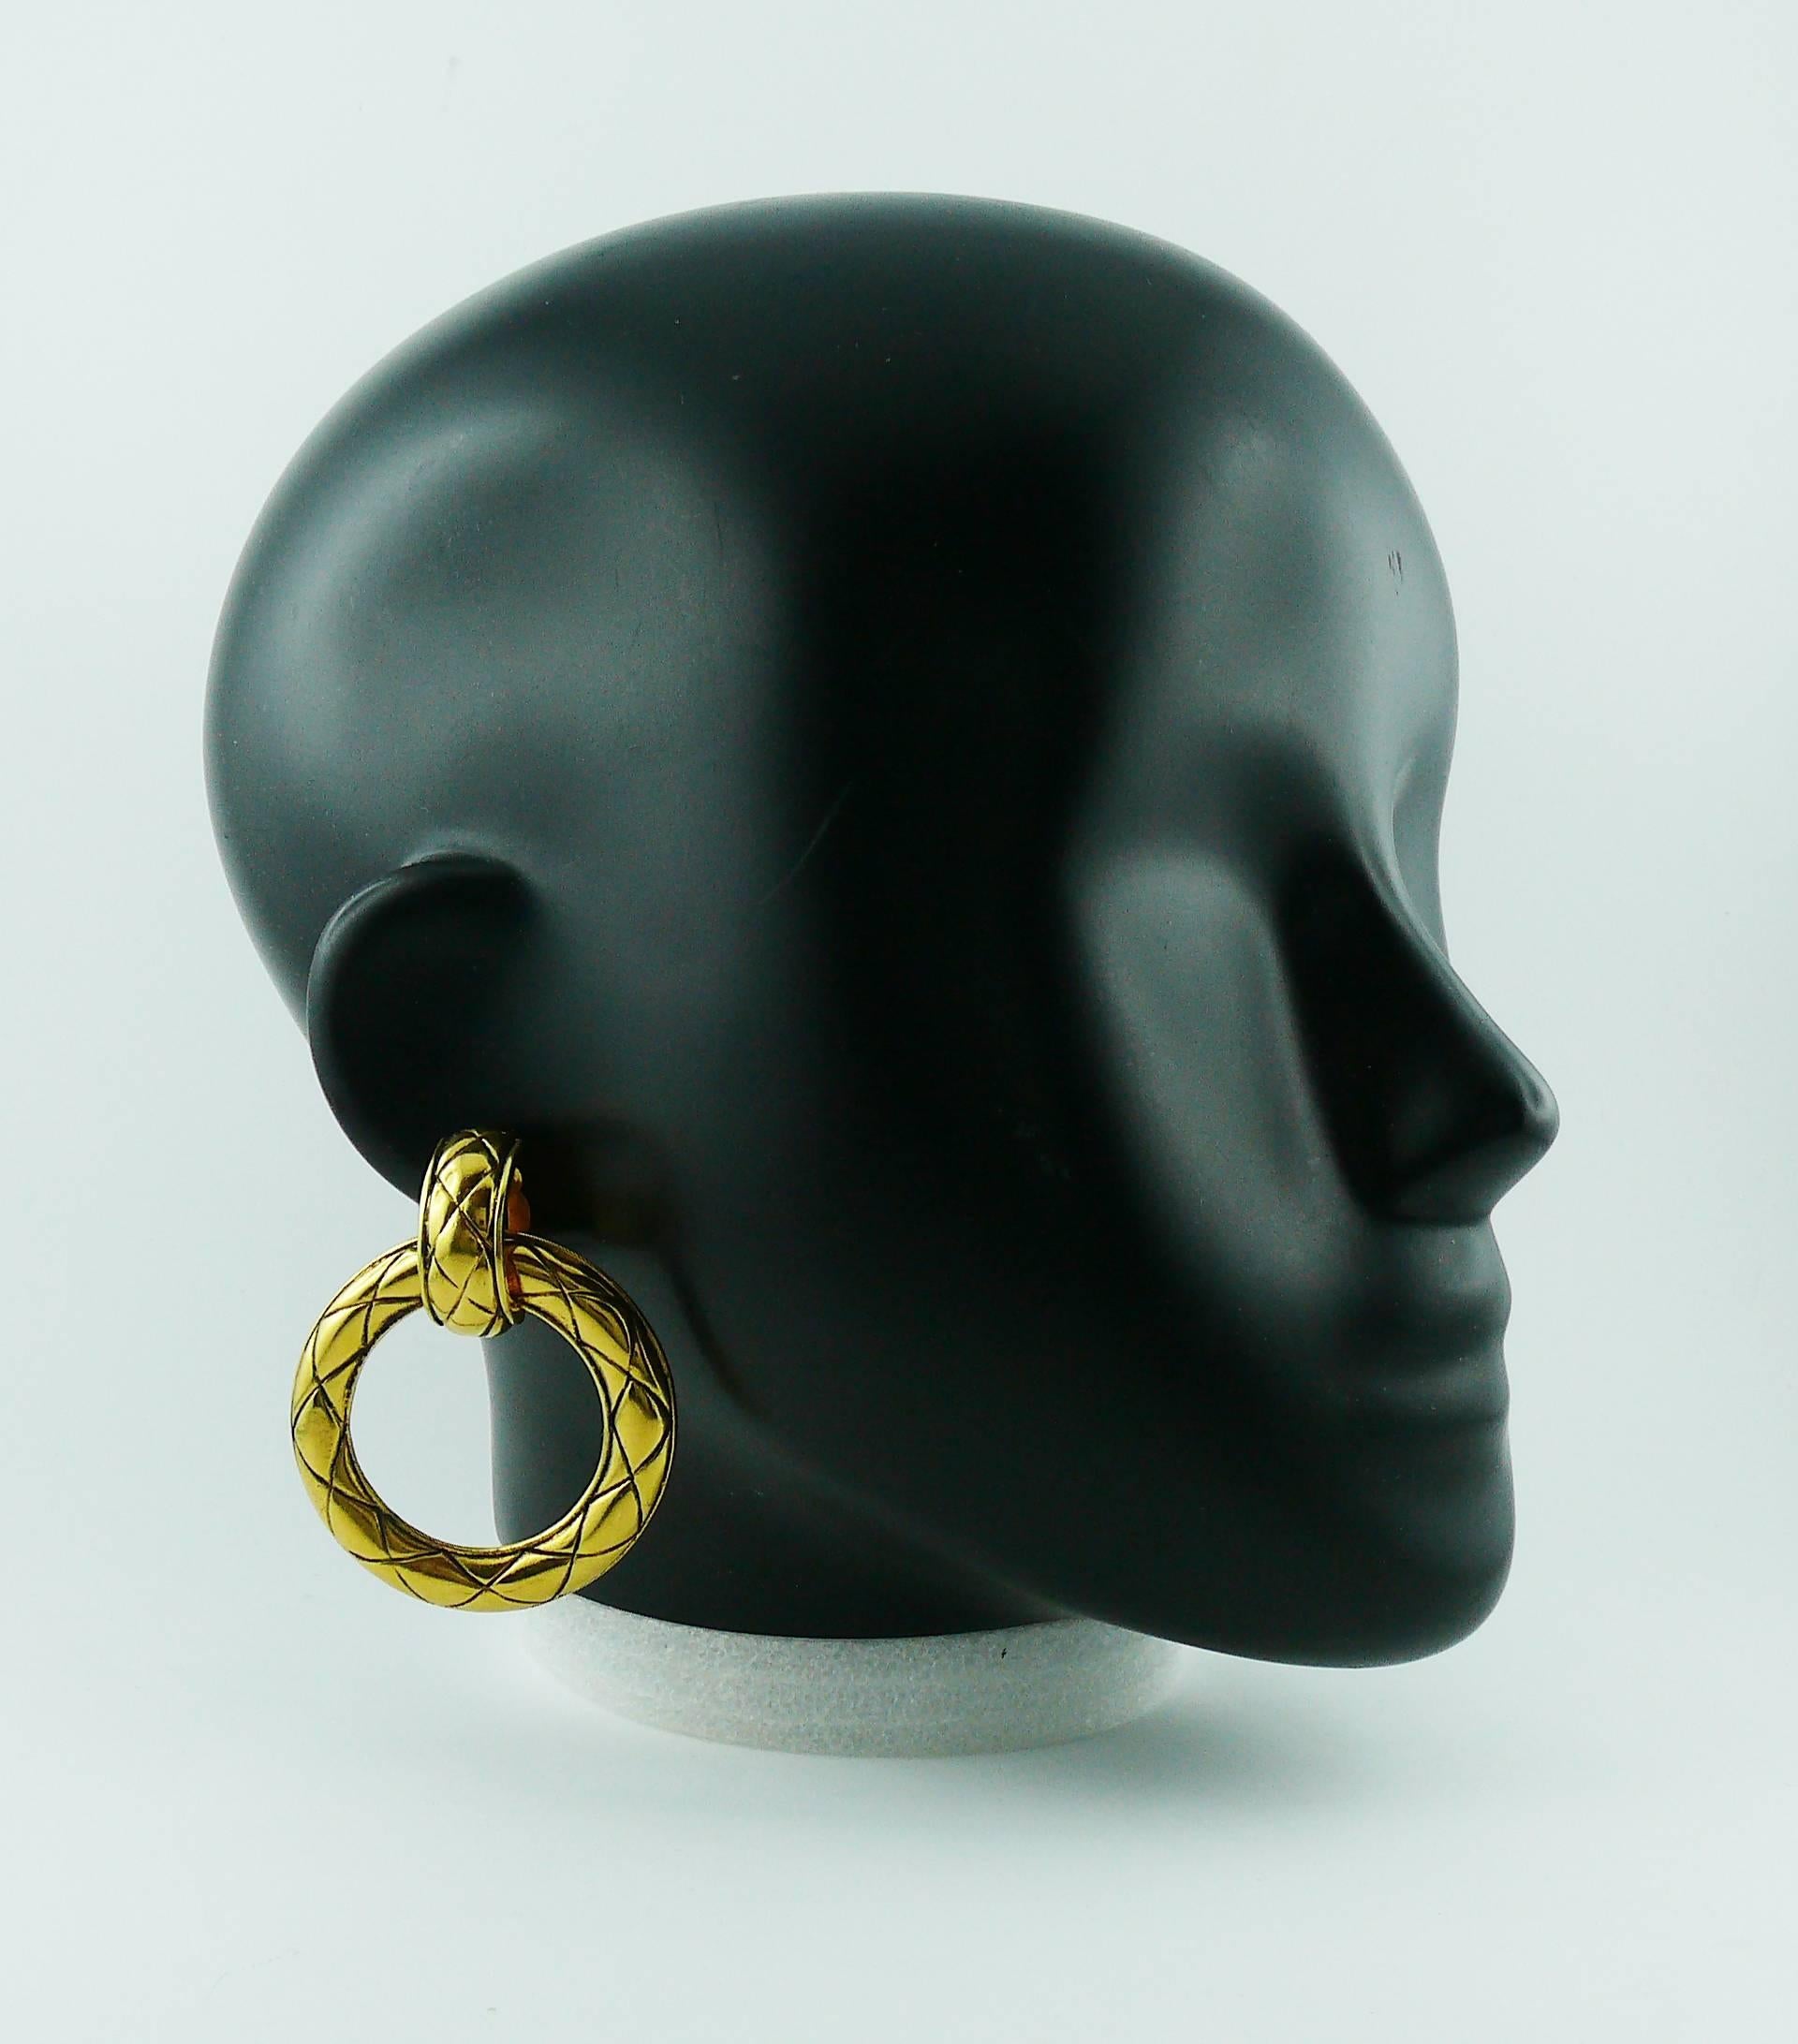 CHANEL vintage classic gold tone with black patina quilted hoop earrings (clip-on).

Can be worn two ways.

Marked CHANEL Made in France.

Indicative measurements : height approx. 5.8 cm (2.28 inches) / max. diameter approx. 4.9 cm (1.93